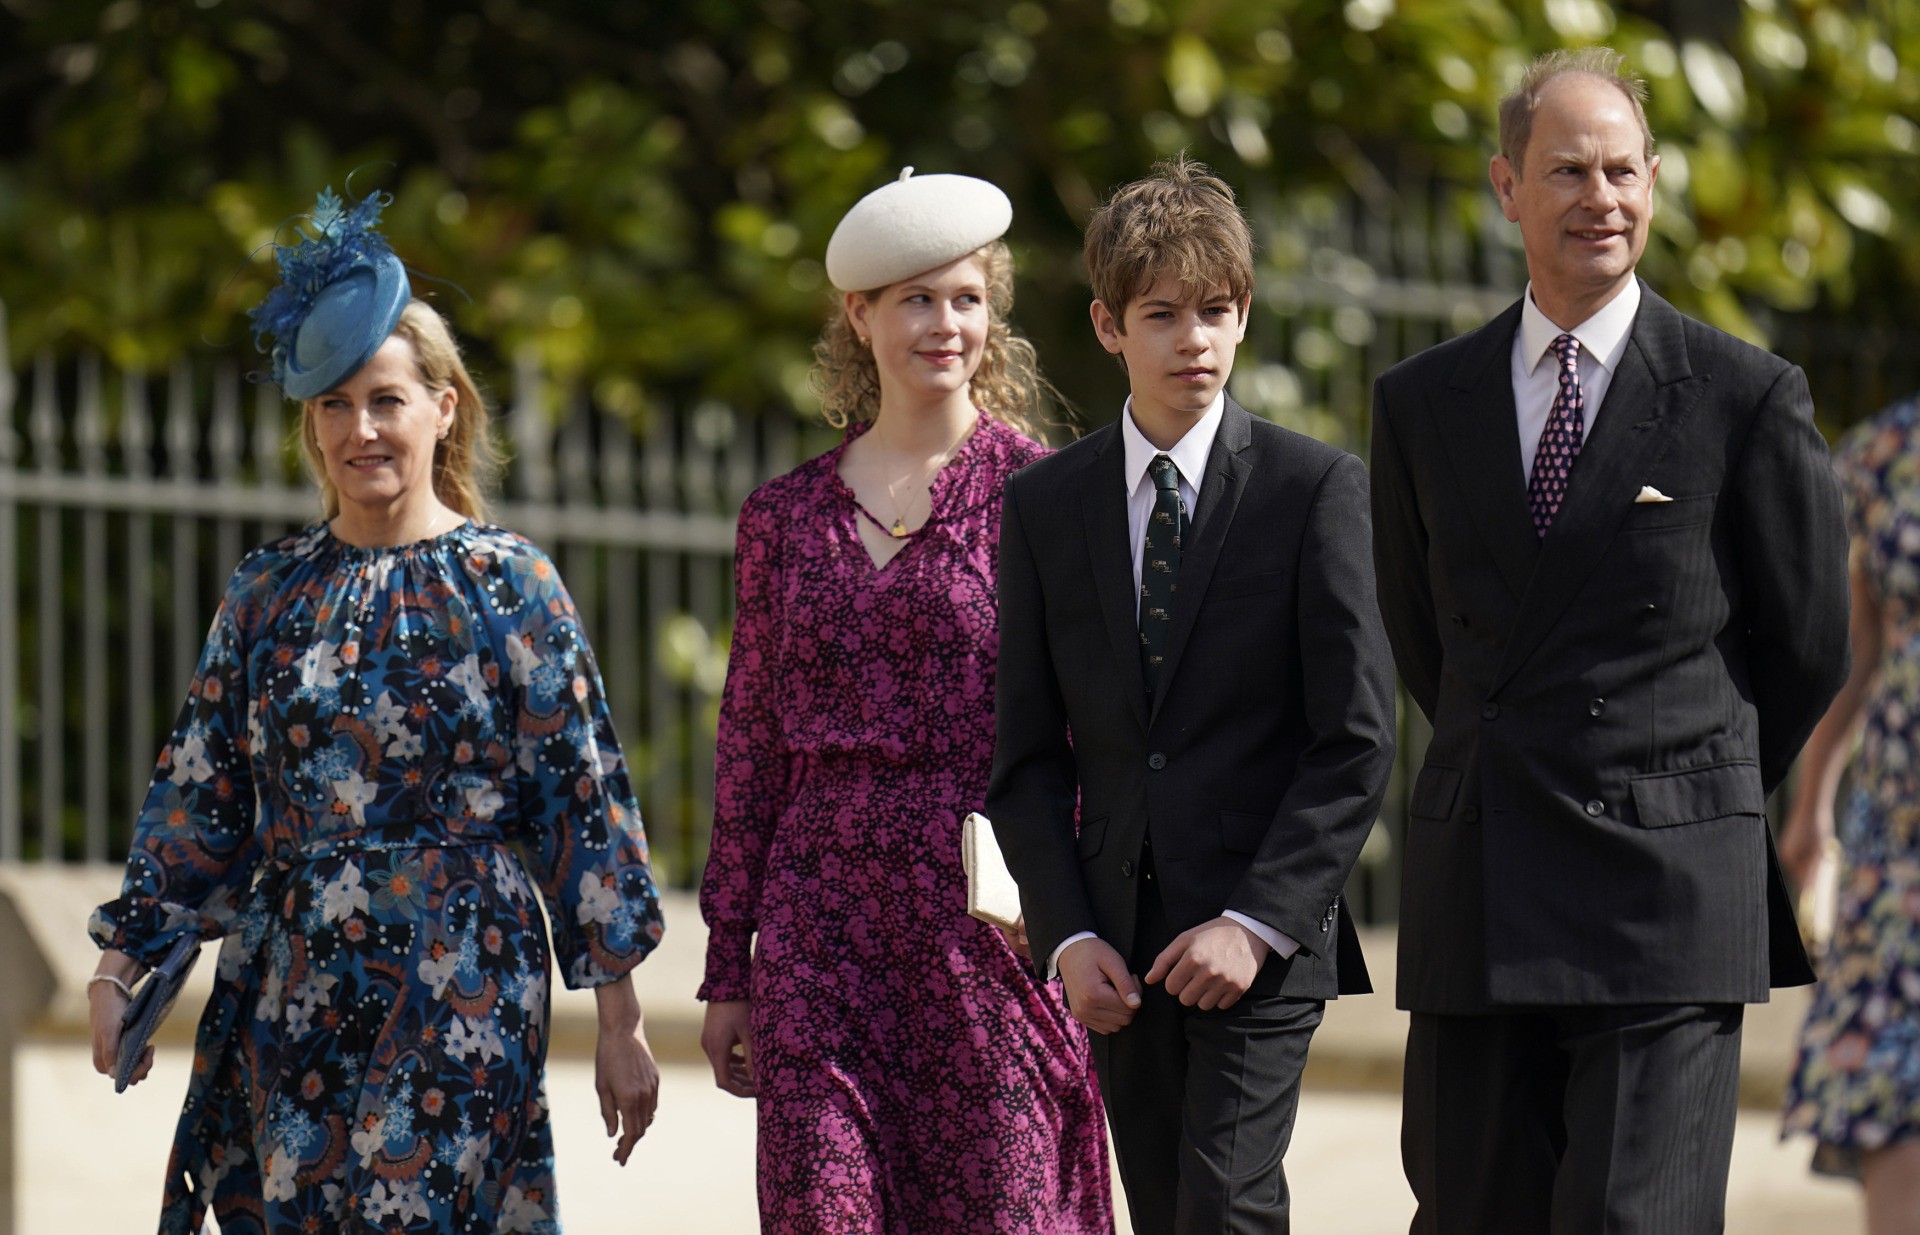 WINDSOR, ENGLAND - APRIL 17: Sophie, Countess of Wessex, Lady Louise Mountbatten-Windsor, James, Viscount Severn and the Prince Edward, Earl of Wessex attend the Easter Matins Service at St George's Chapel at Windsor Castle on April 17, 2022 in Windsor, England. (Photo by Andrew Matthews-WPA Pool/Getty Images)